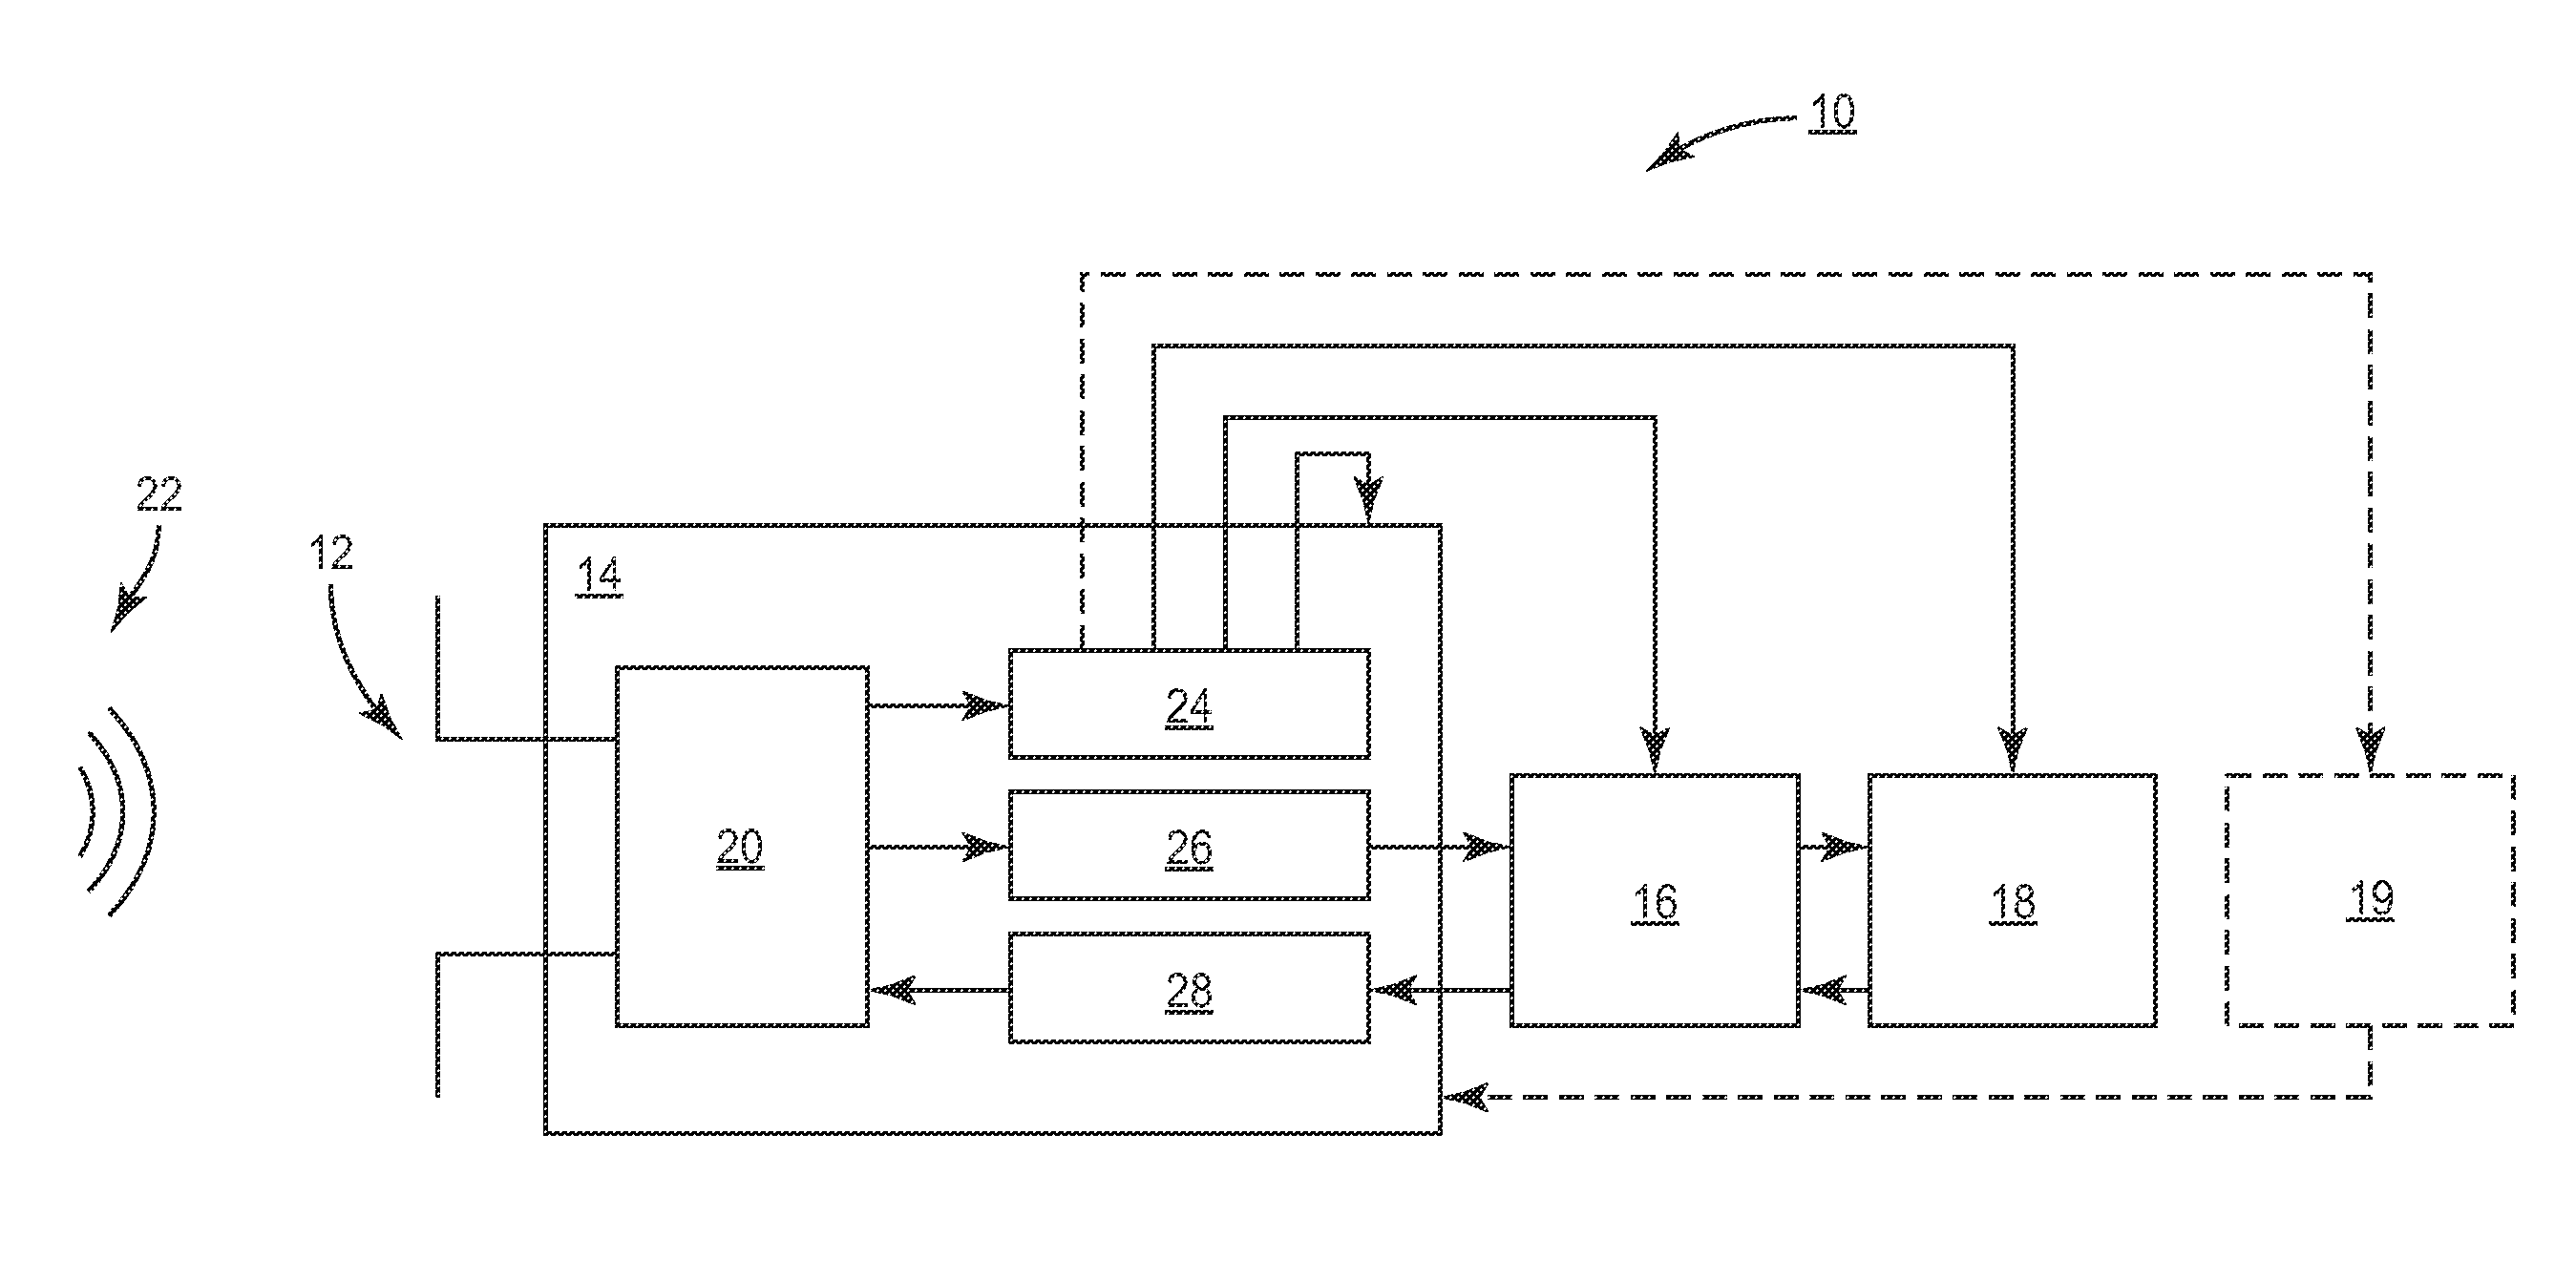 Parallel stage power output rectifier for radio-frequency identification (RFID) devices, and related components and methods